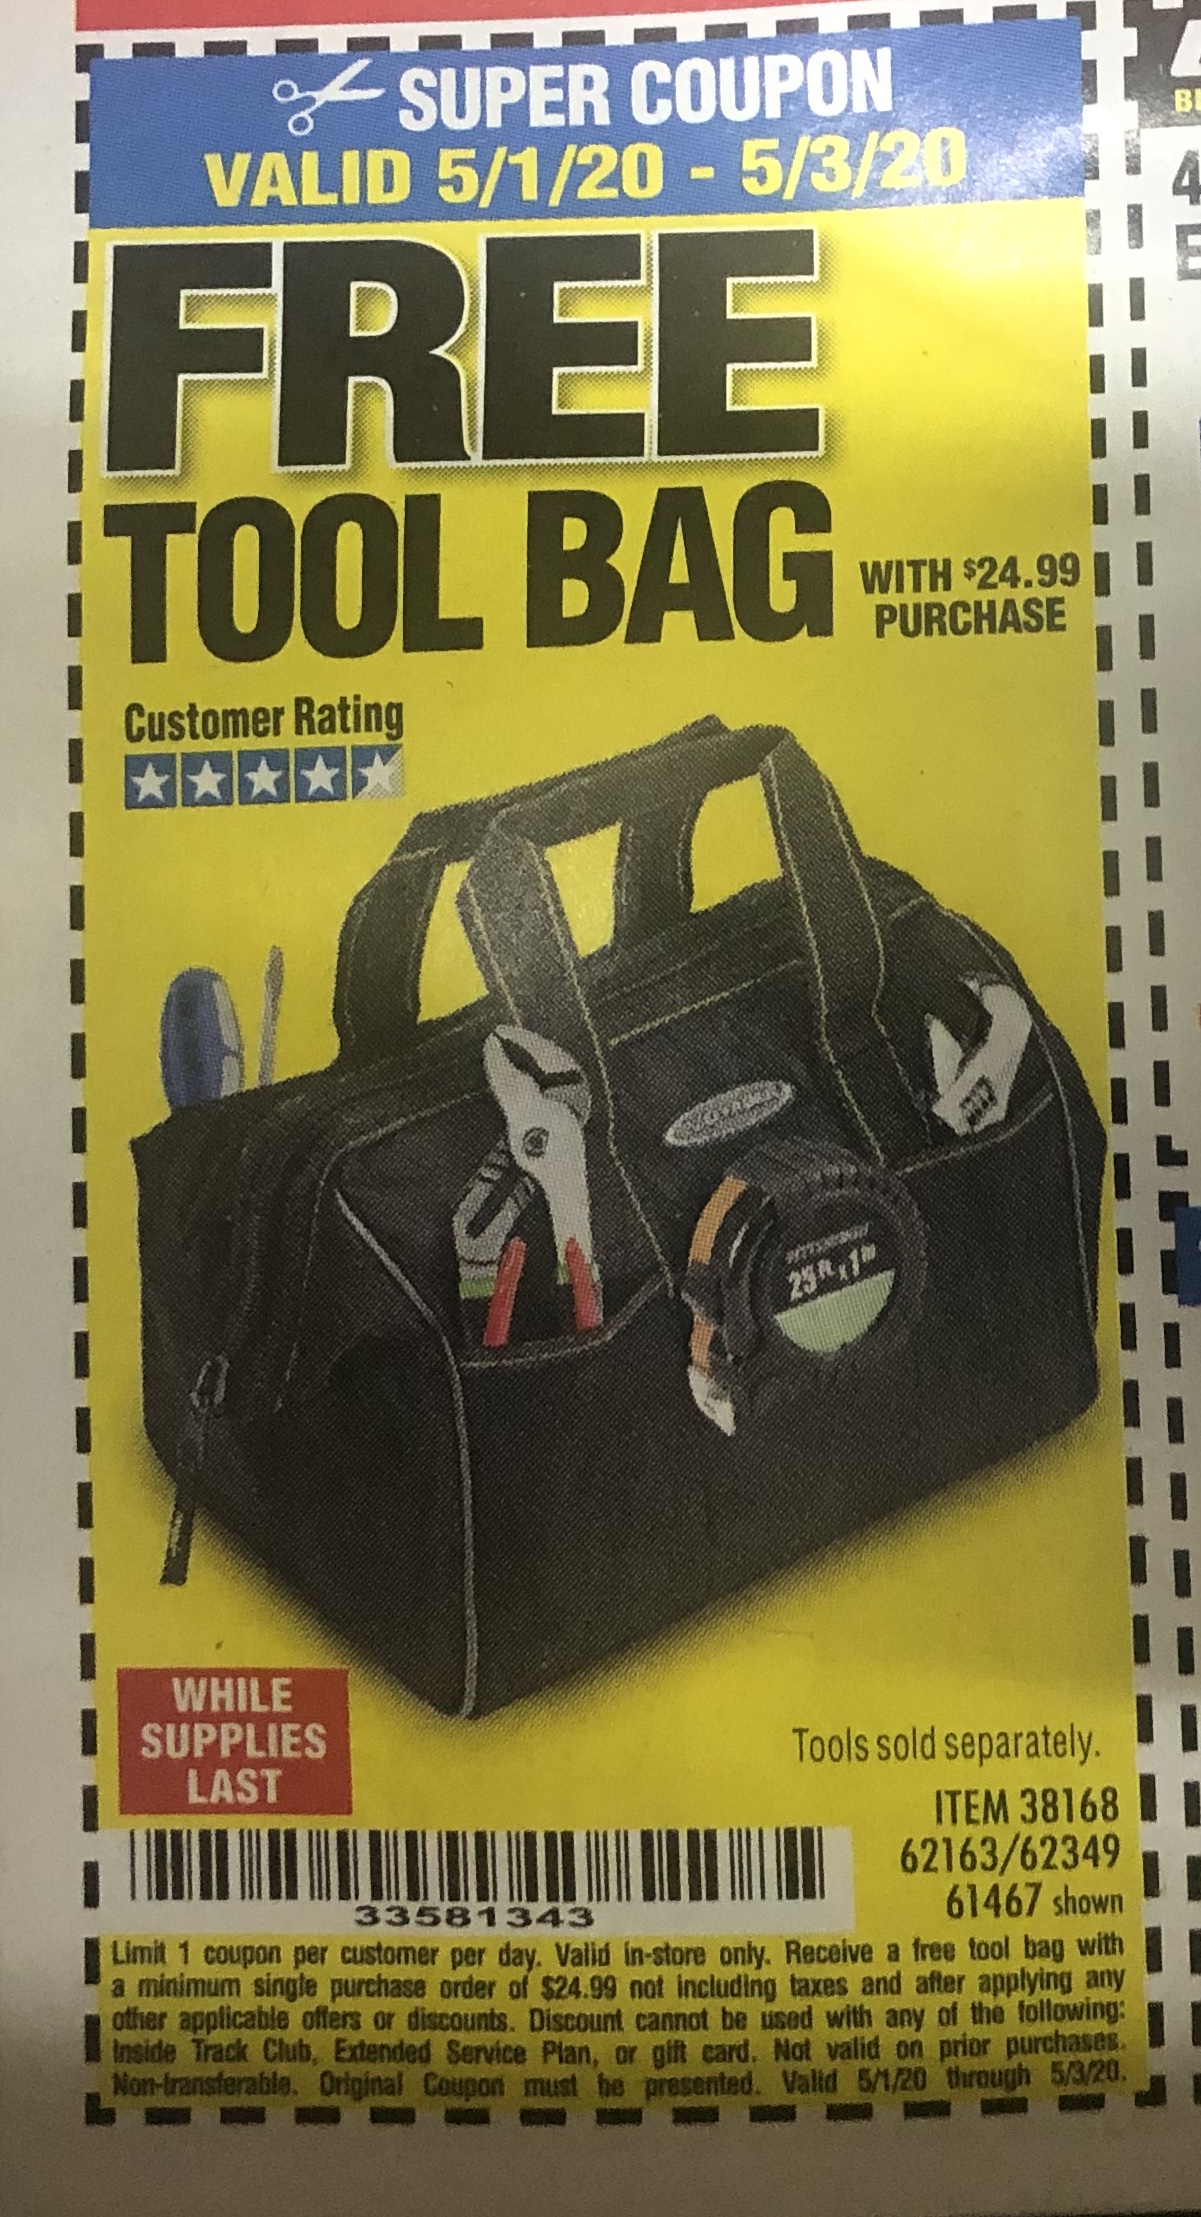 The Best Harbor Freight Printable Coupon 2020 | Alma Website